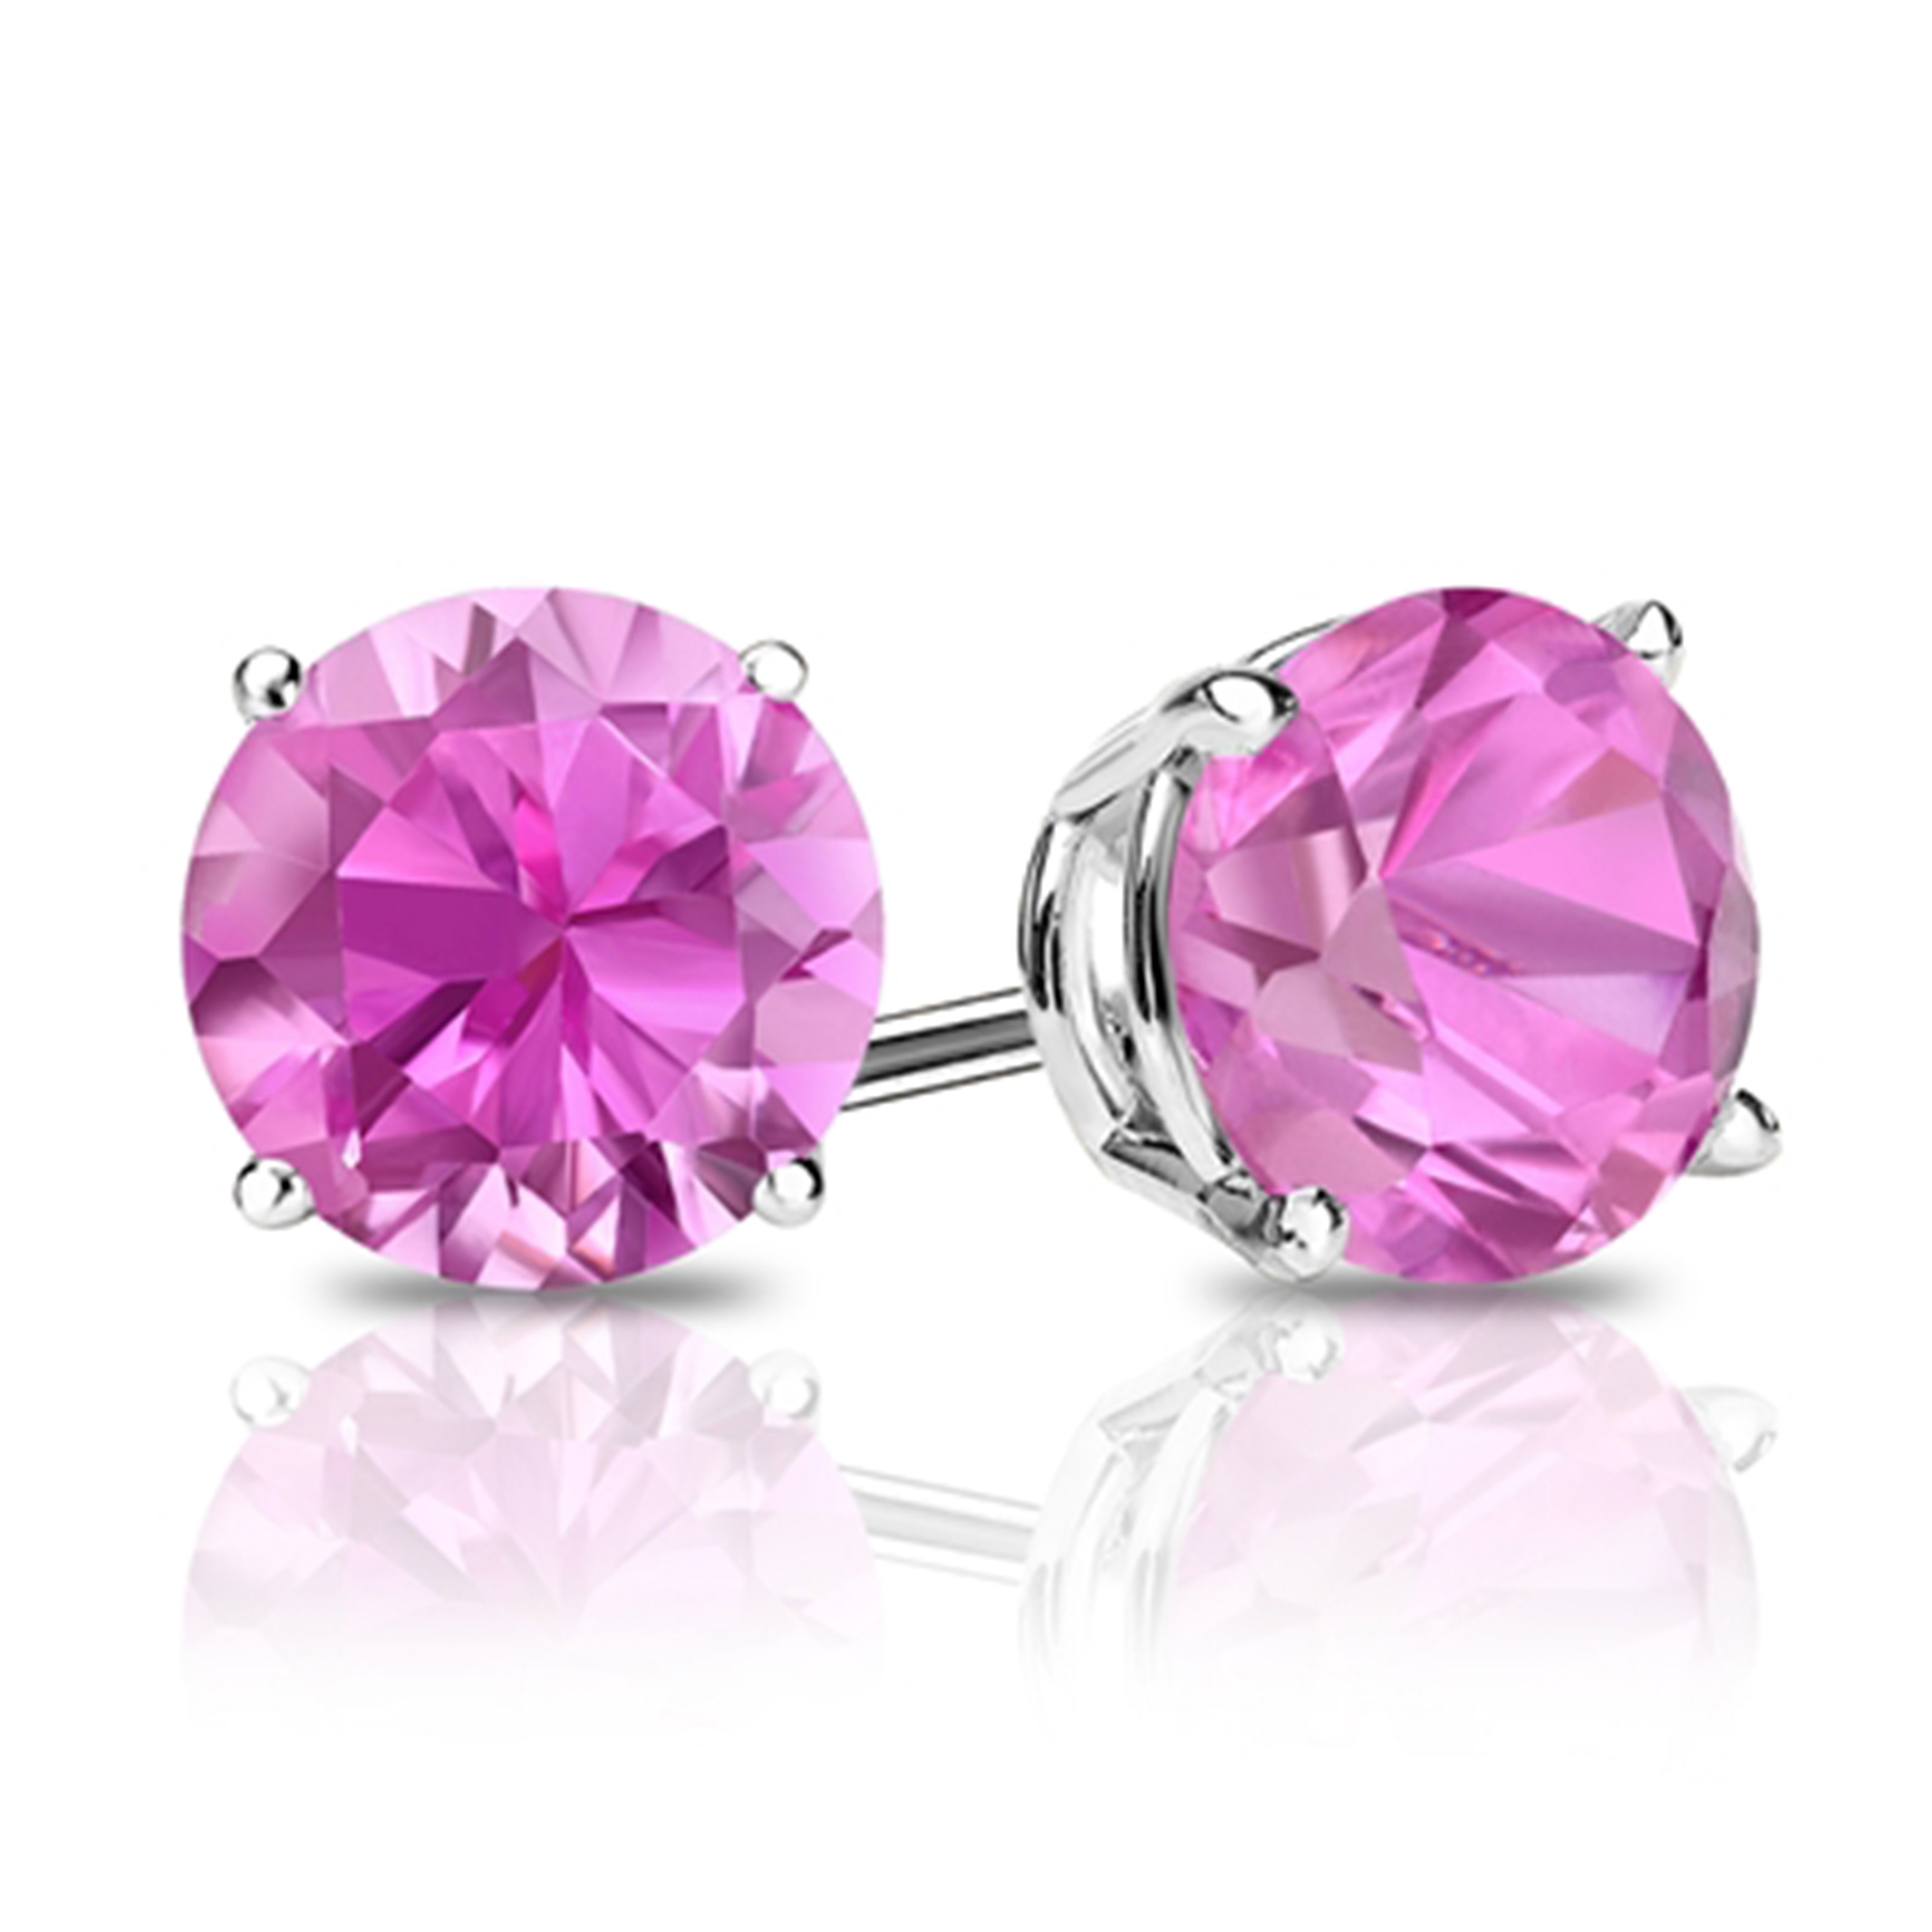 Bonjour Jewelers 14k White Gold Over Sterling Silver 3 Ct Round Pink Tourmaline Stud Earrings Pack Of 2.